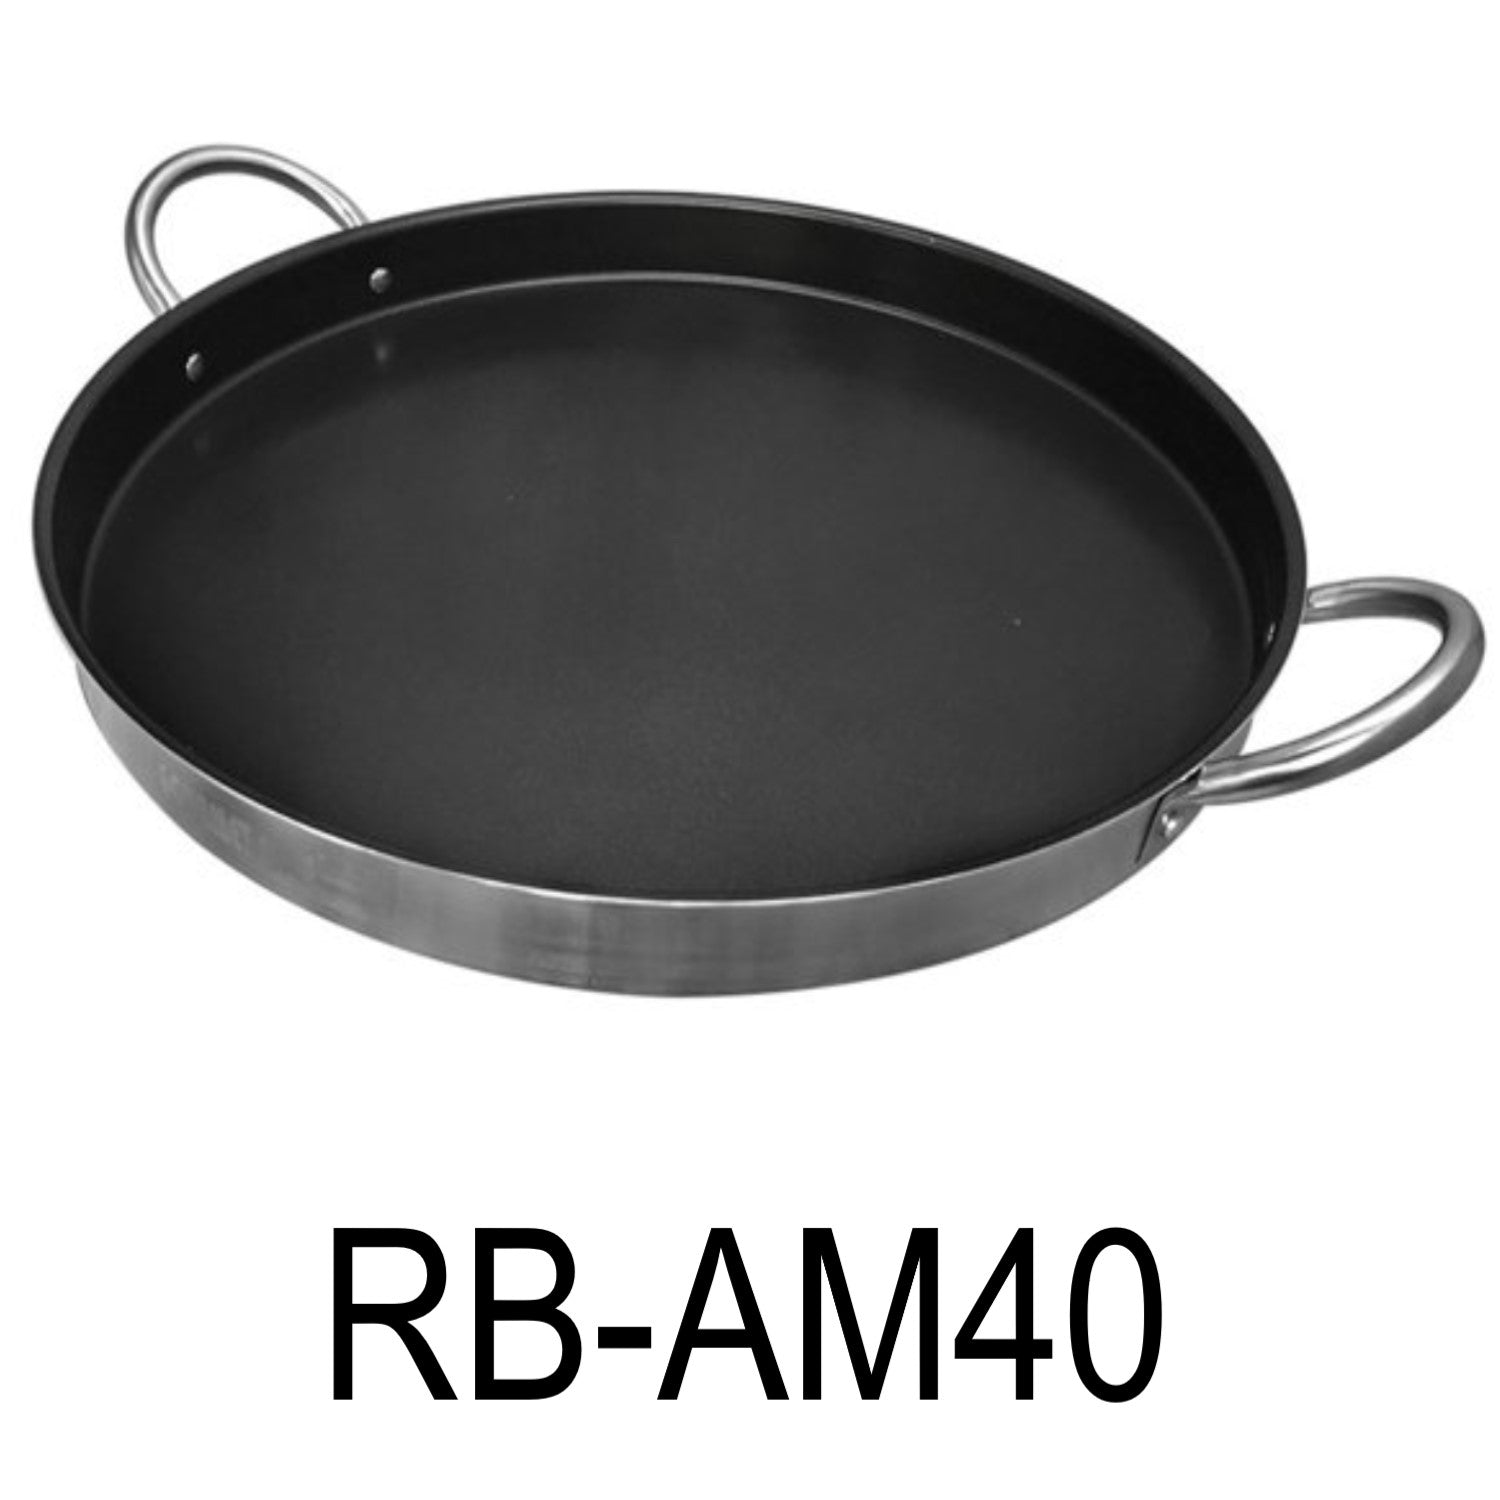 16'' Diameter Stainless Steel Flat Comal Griddle Pan Cookware